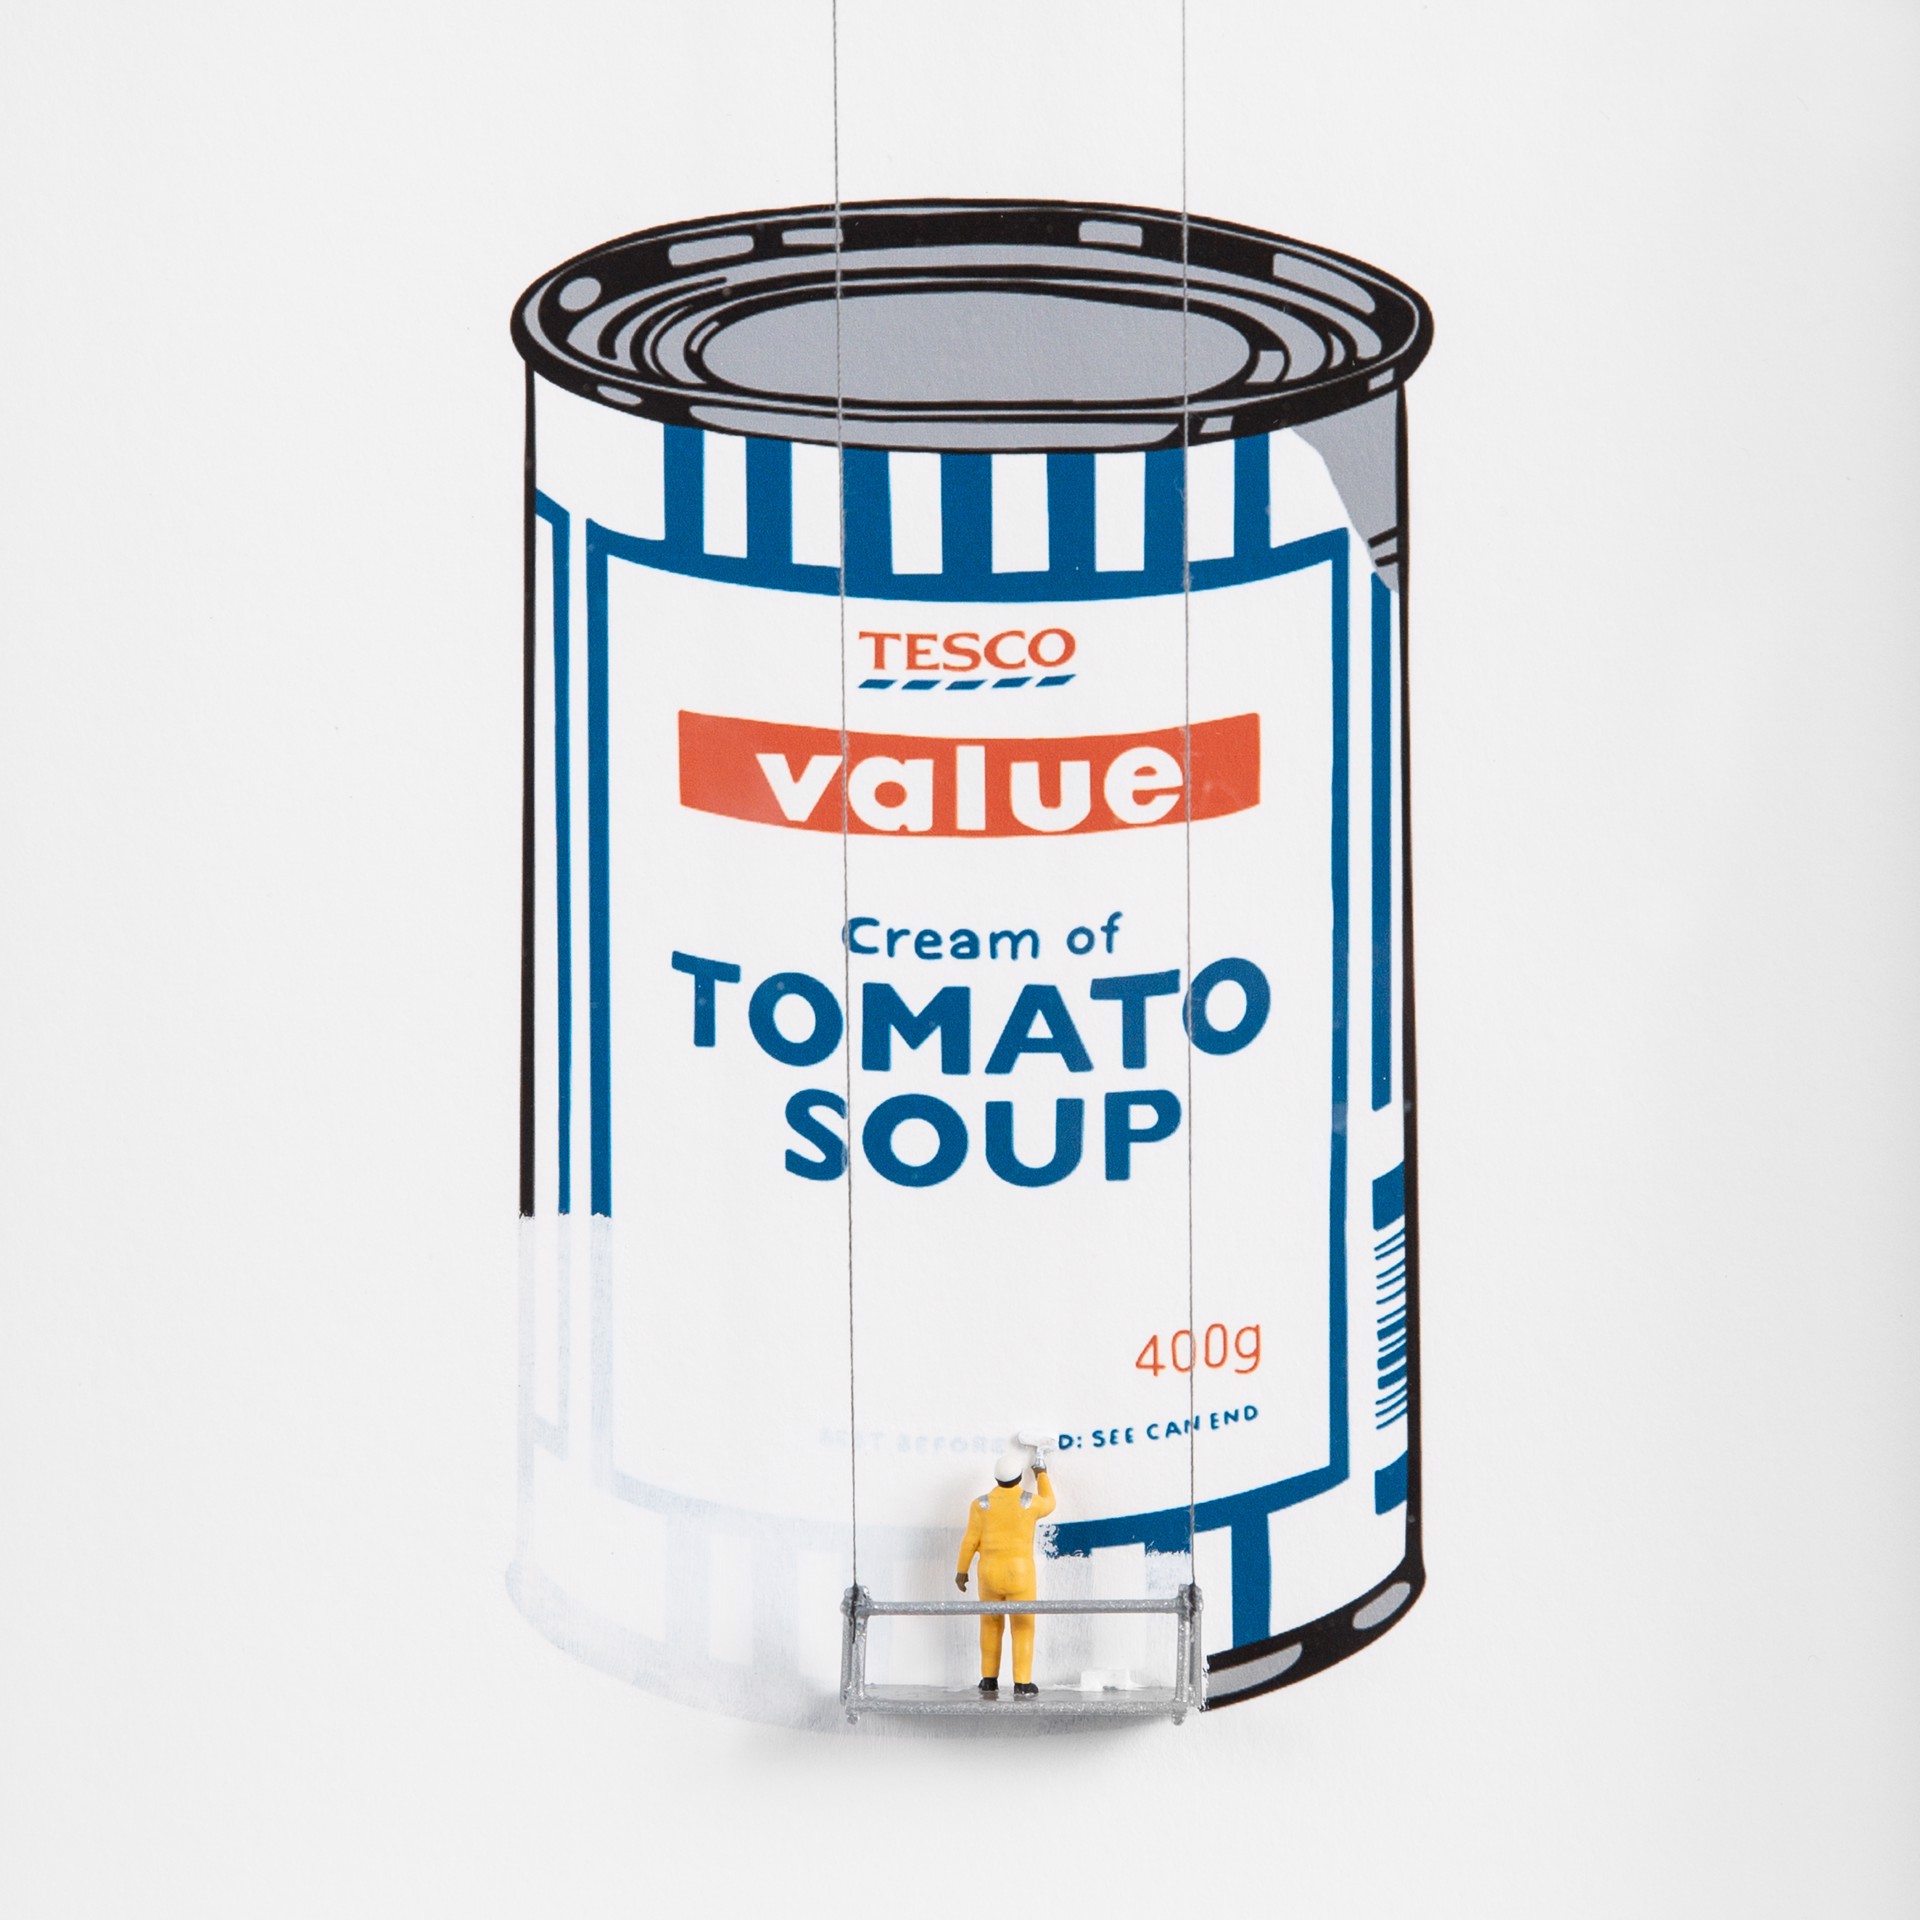 Scrubbed Out Soup Cans (1) by Roy's People